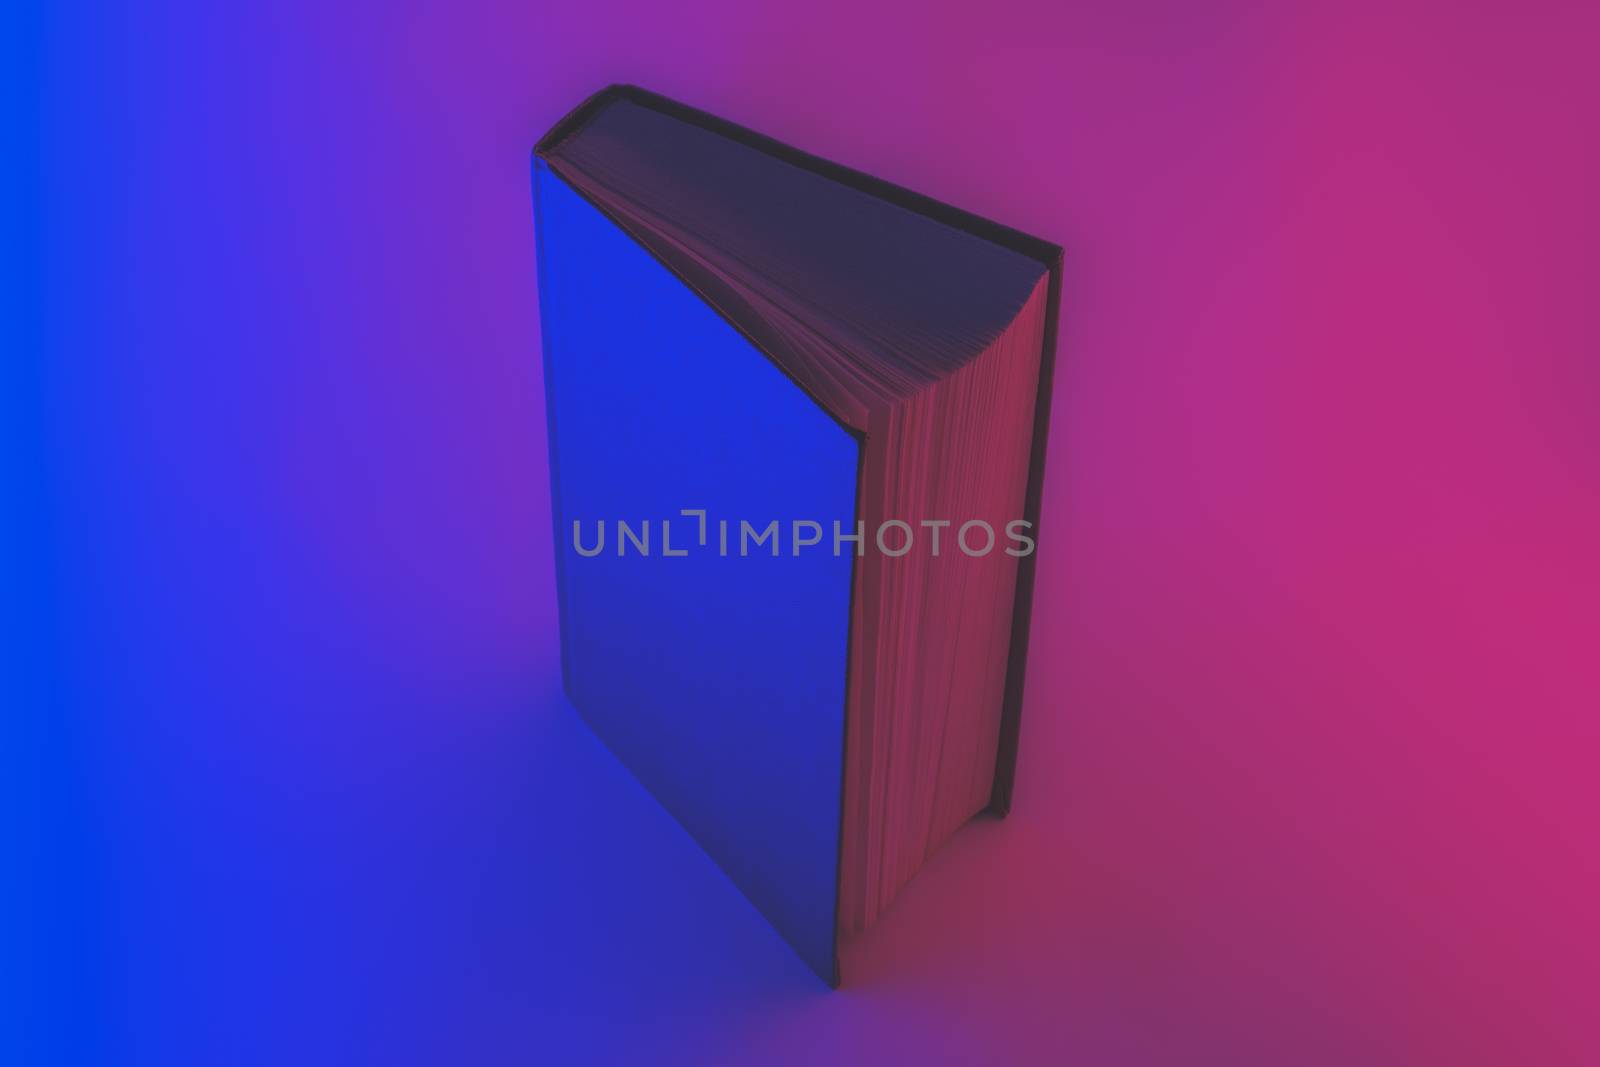 Open book in faded blue and red colors. Neon gradients, abstract background image of a book